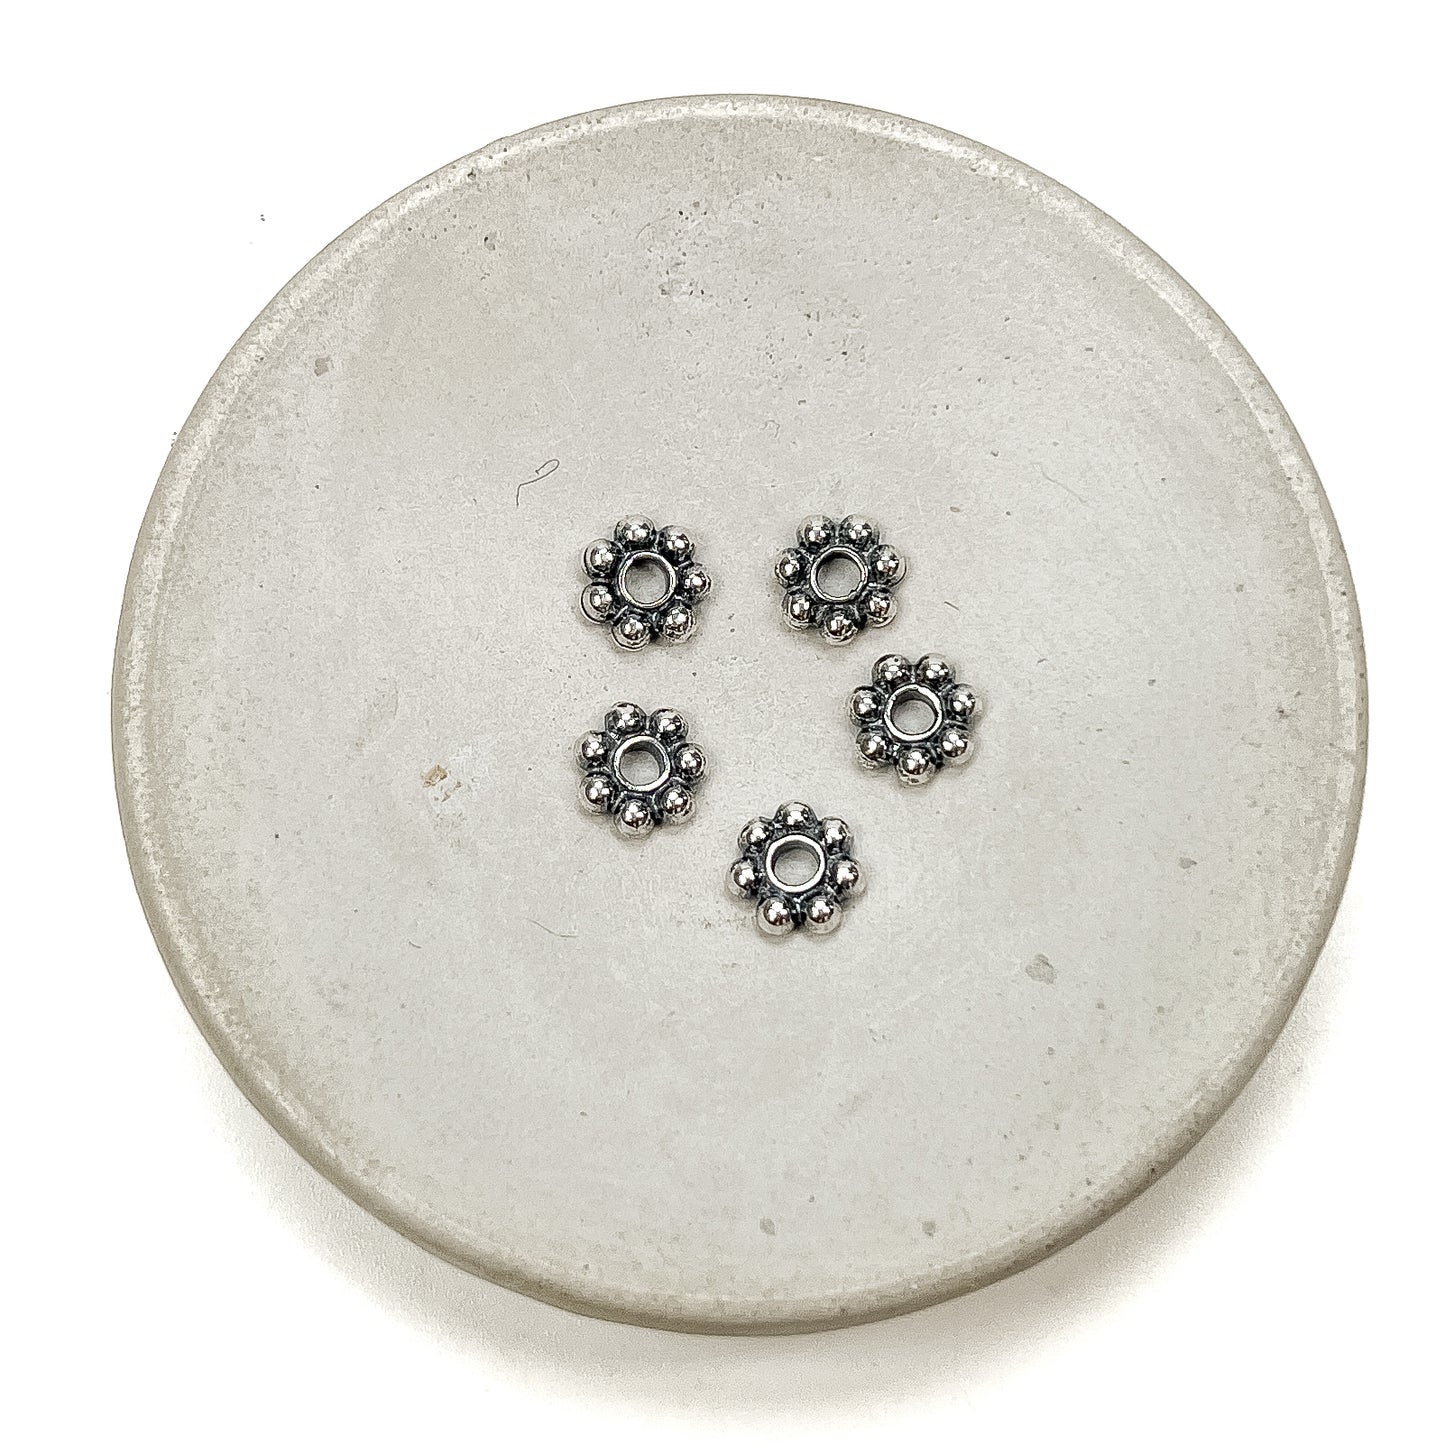 7mm Super Daisy Spacer Bead (Silver Plated) - 5 pcs.